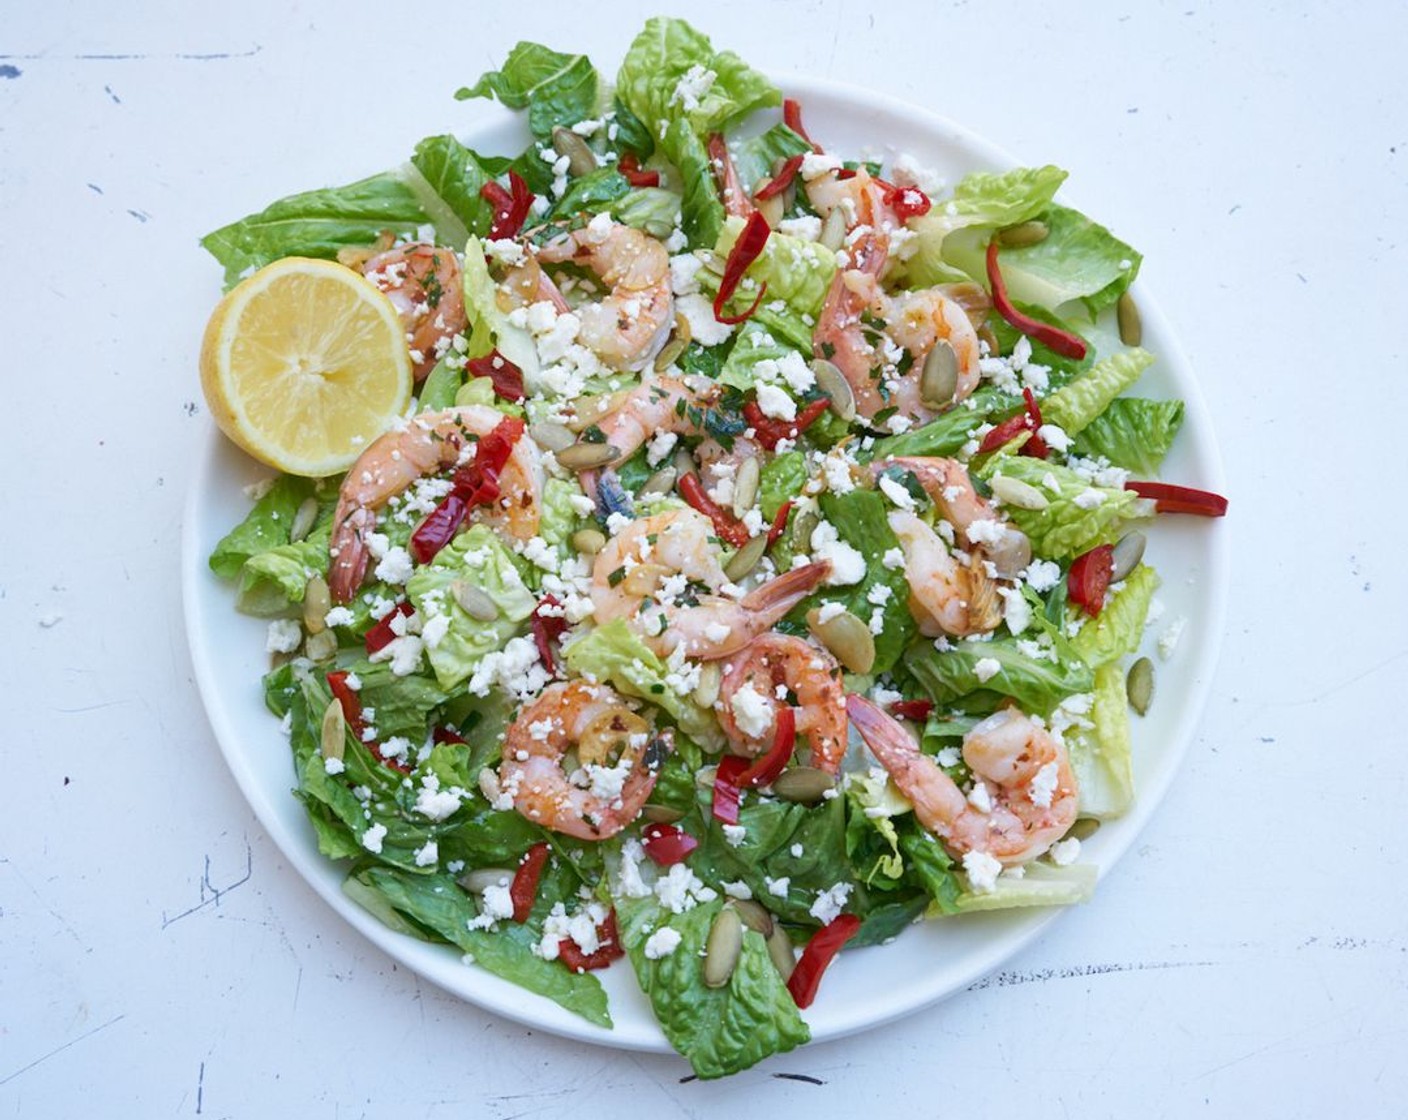 Shrimp Salad with Romaine, Peppers, and Lemon-Garlic Dressing